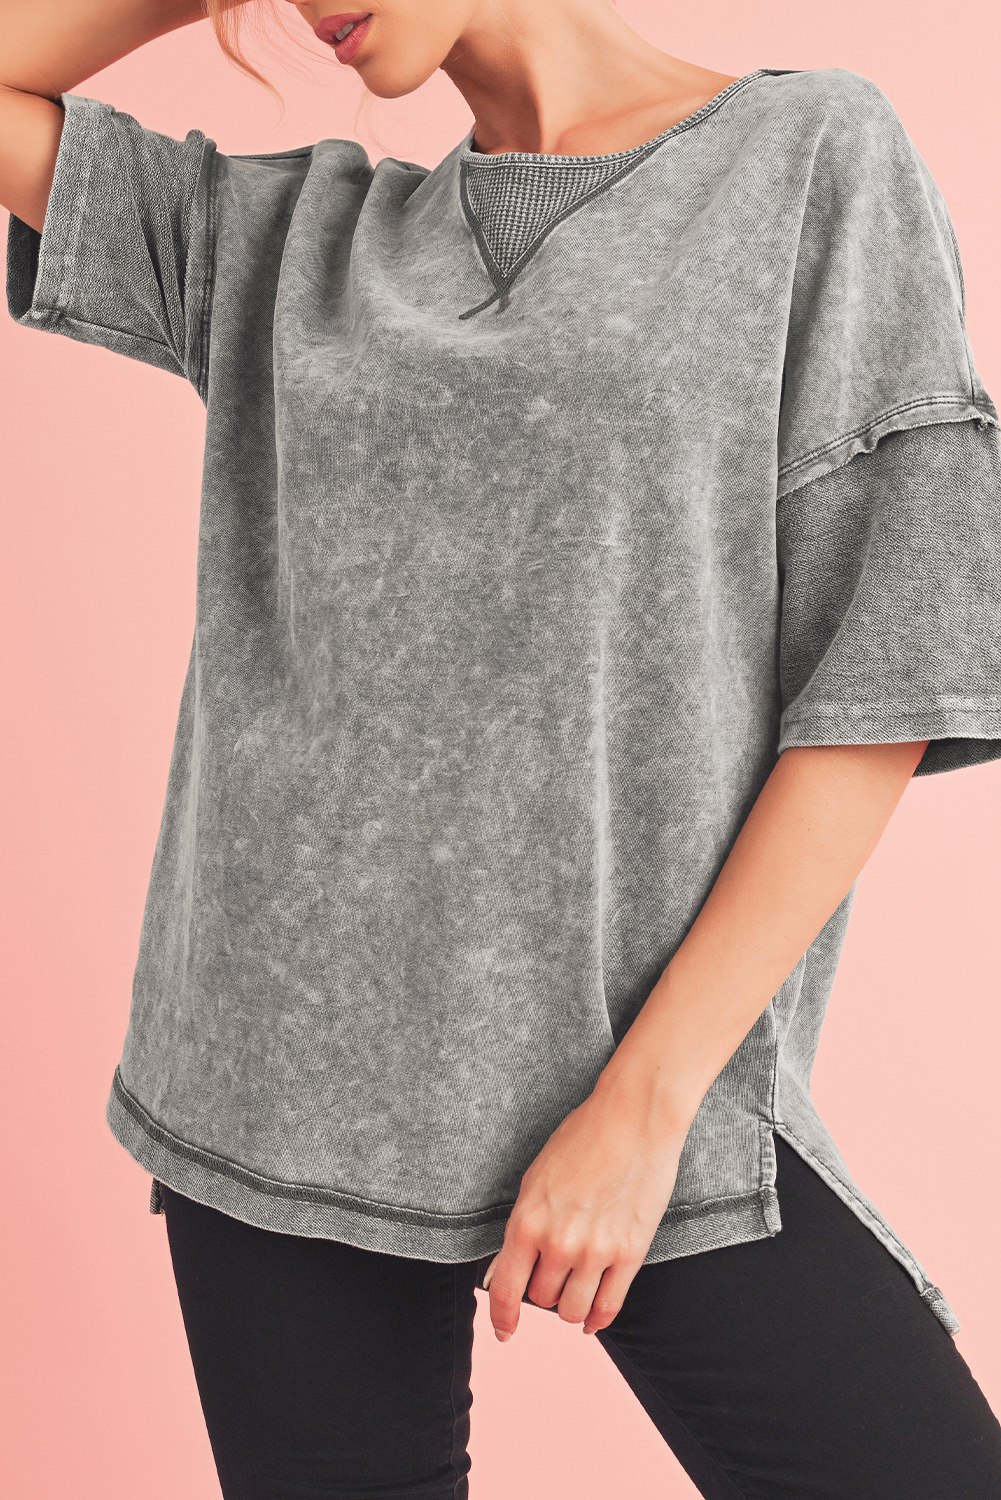 Shewin Wholesale Dropshippers Gray Mineral Wash Exposed Seam Drop Shoulder Oversized Tee